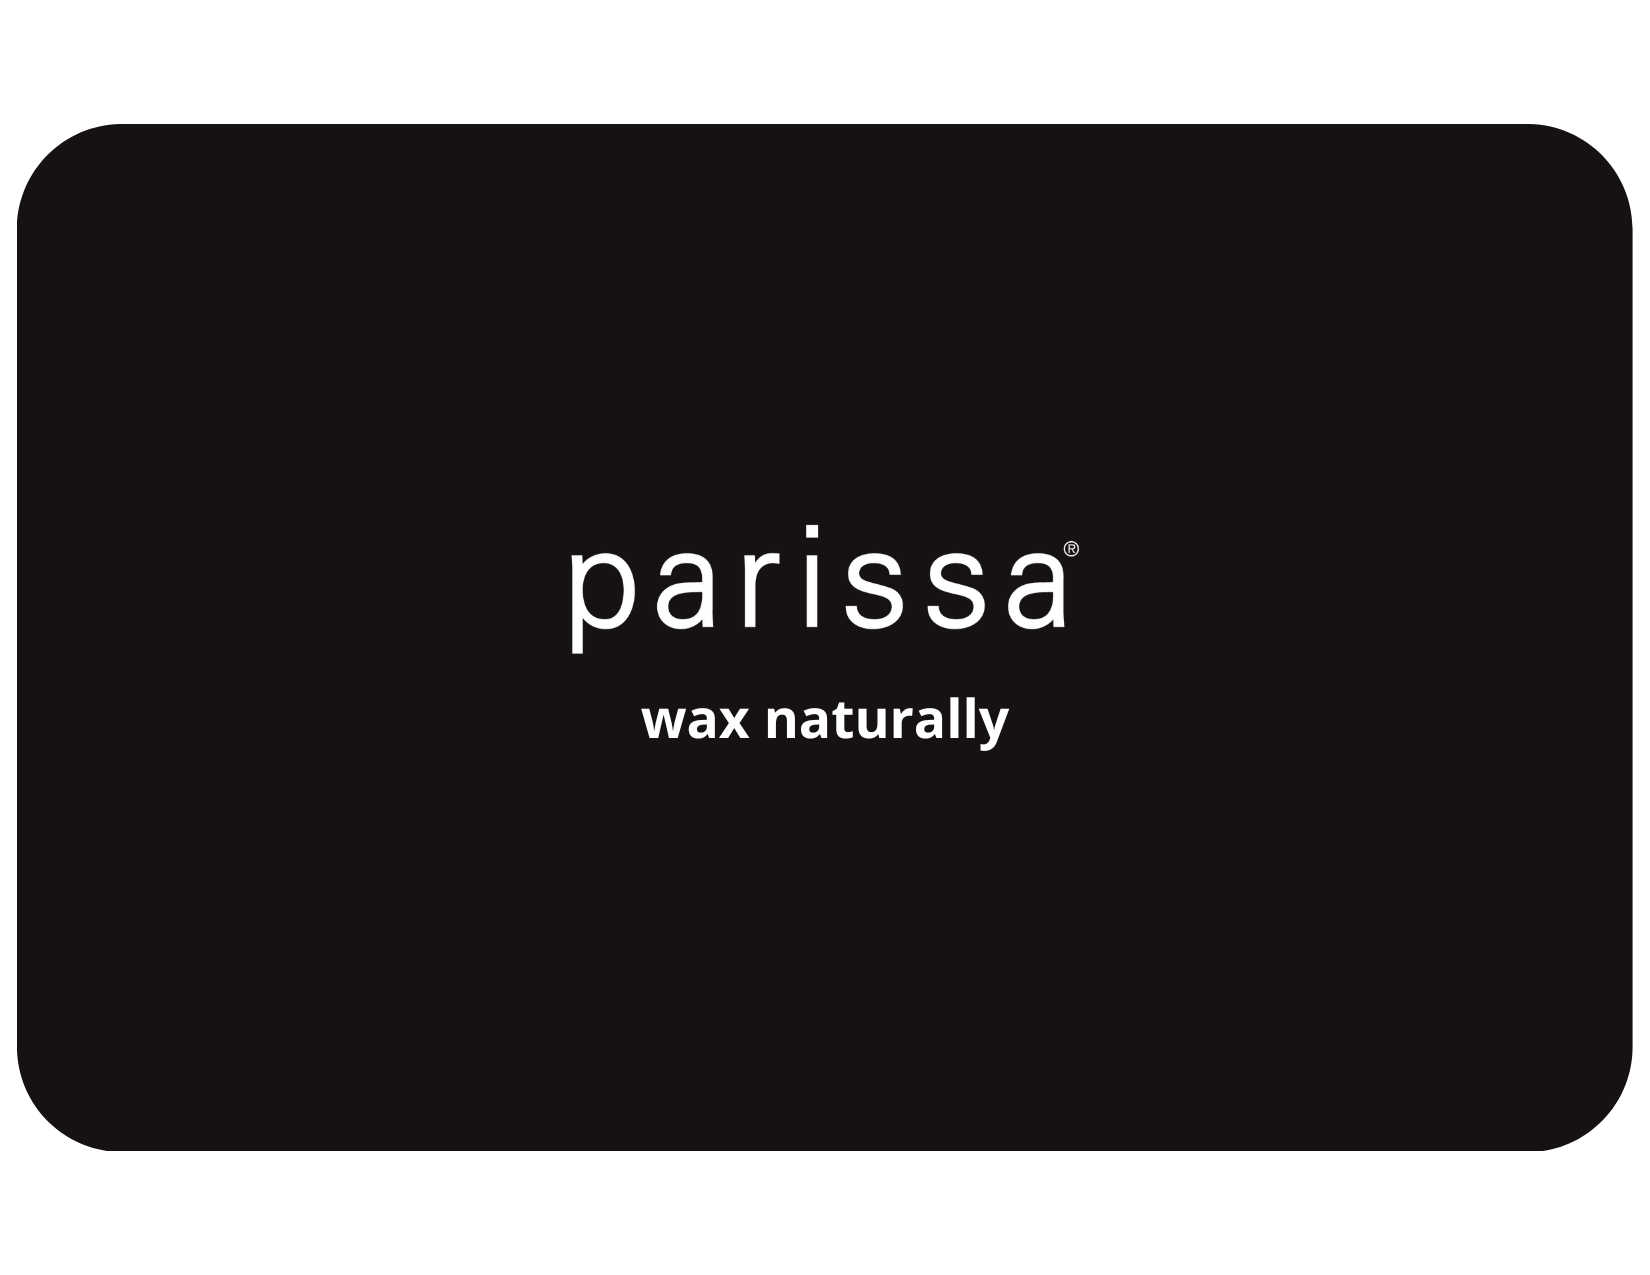 Parissa Gift Card Products Official Parissa® Store US$100.00 